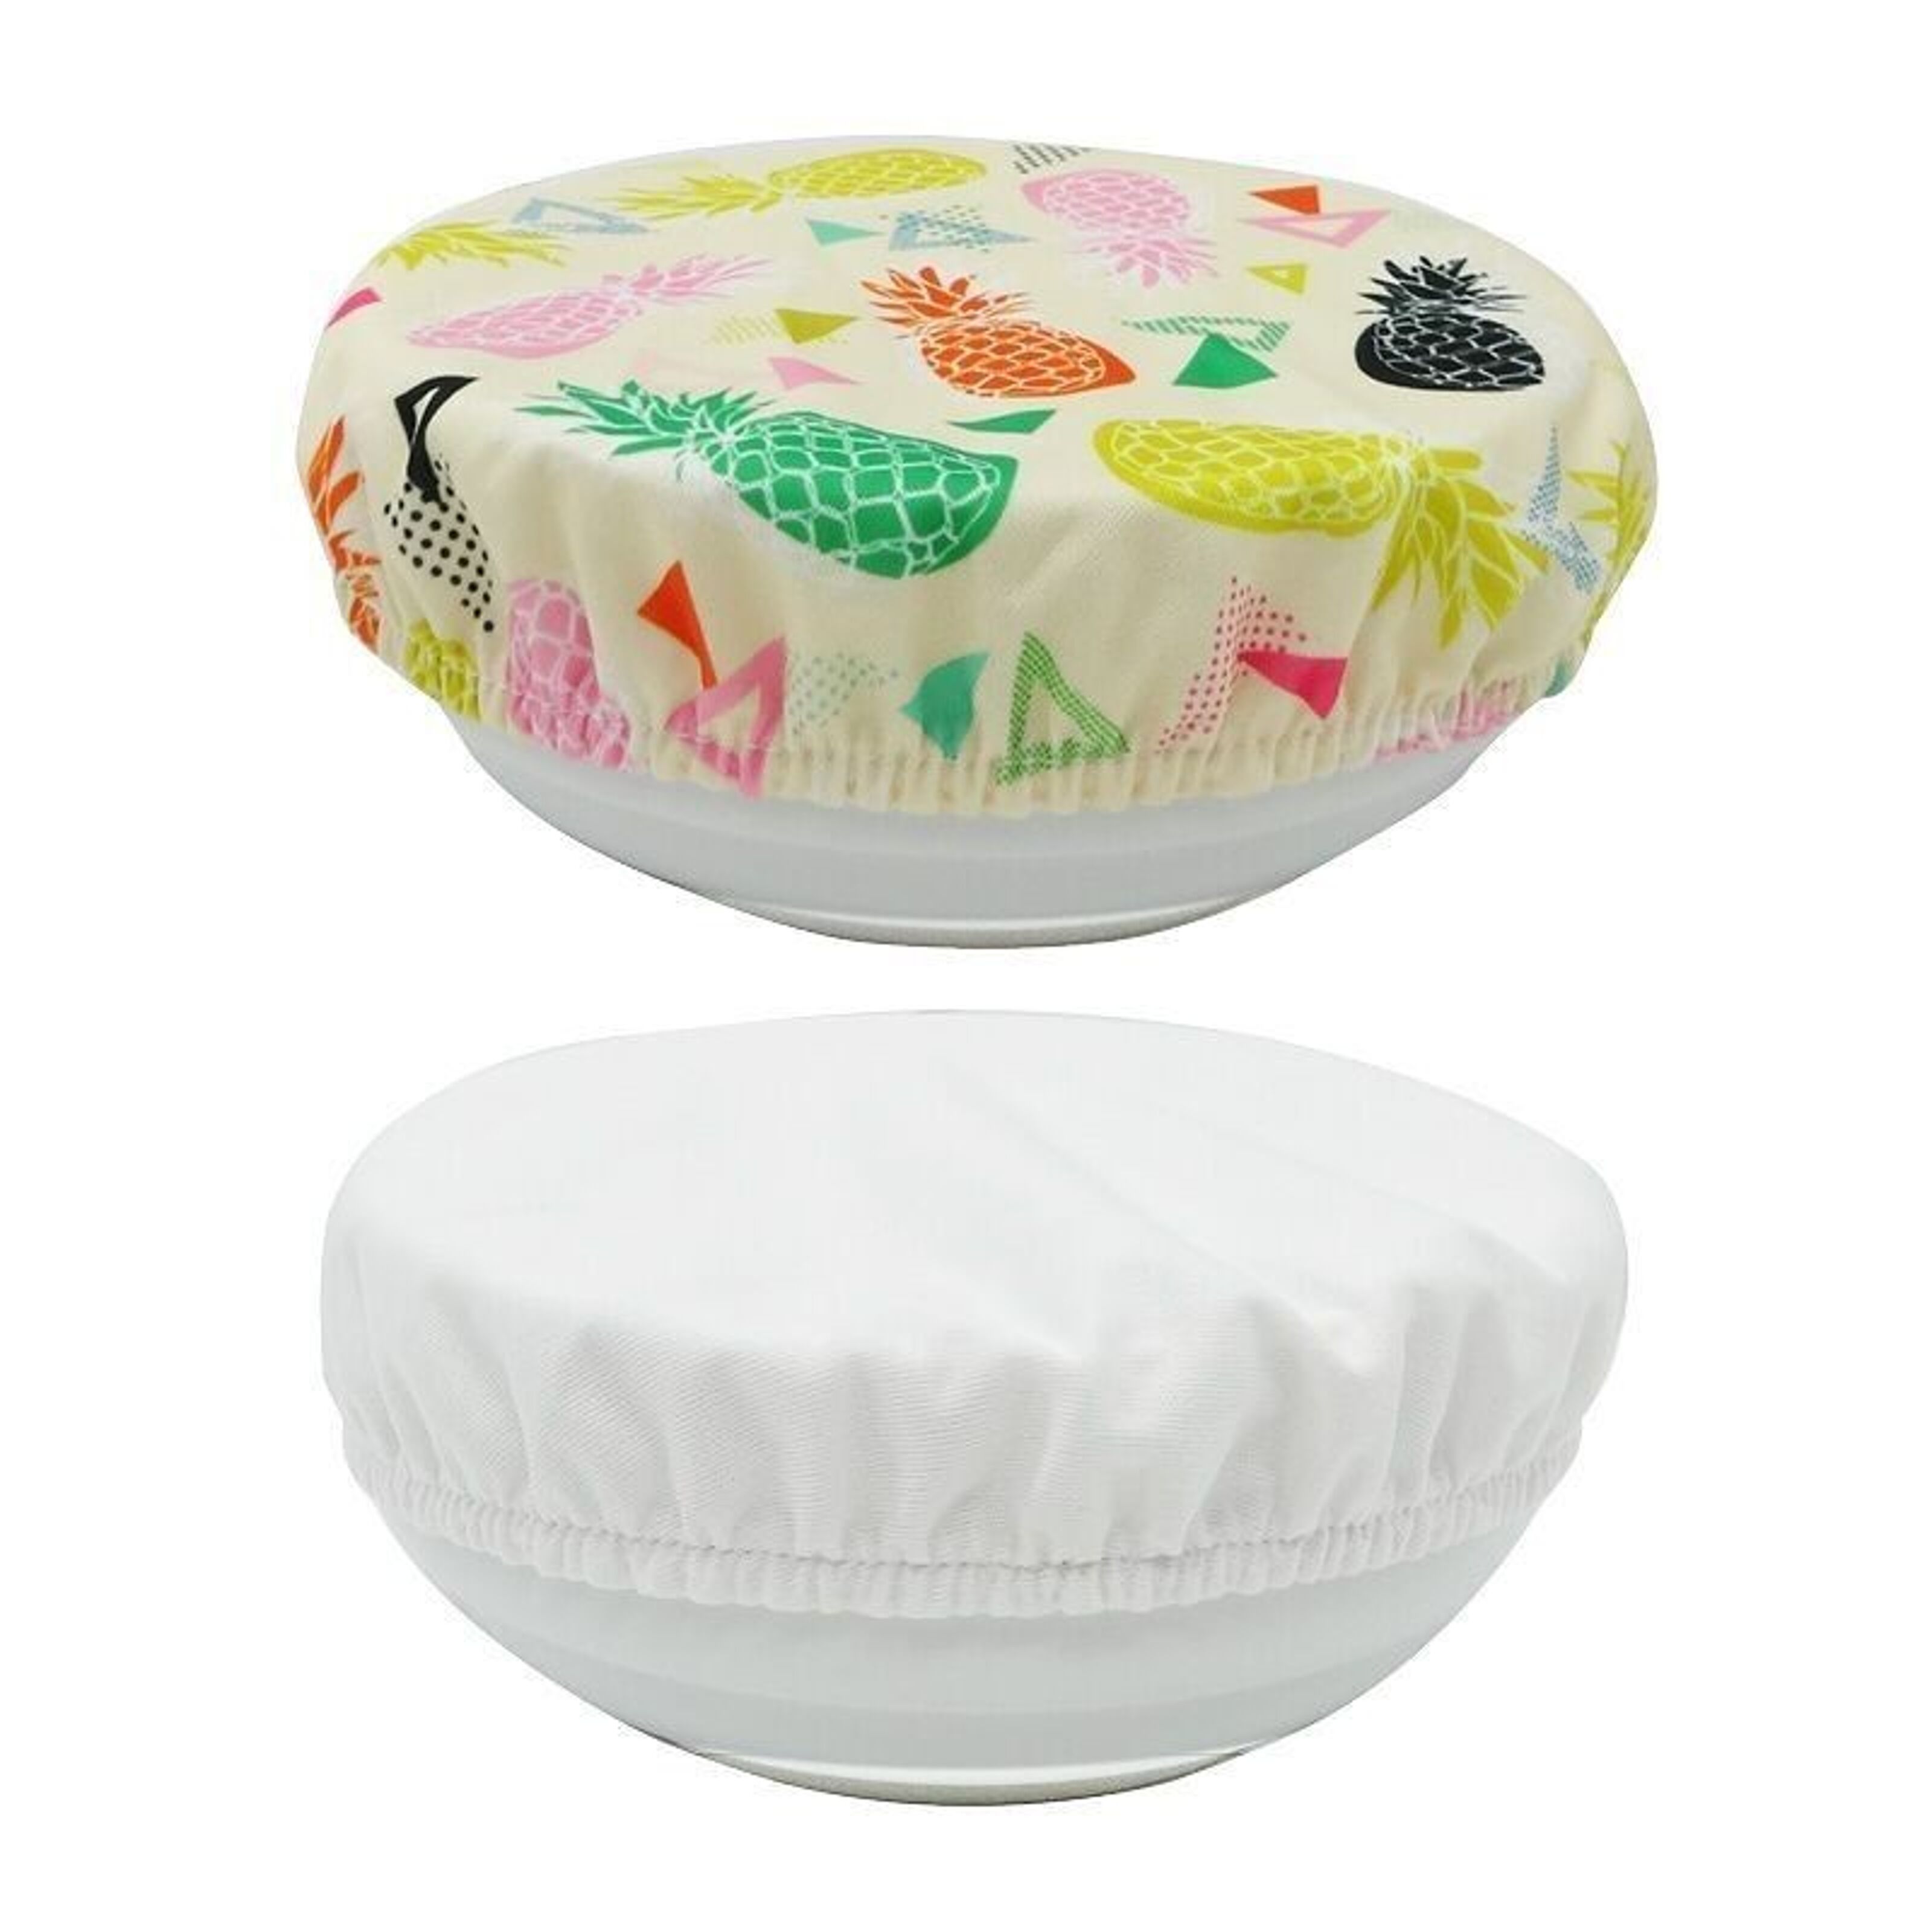 Cloth Bowl Covers 8 Covers (2S, 2M, 2L, 2XL)